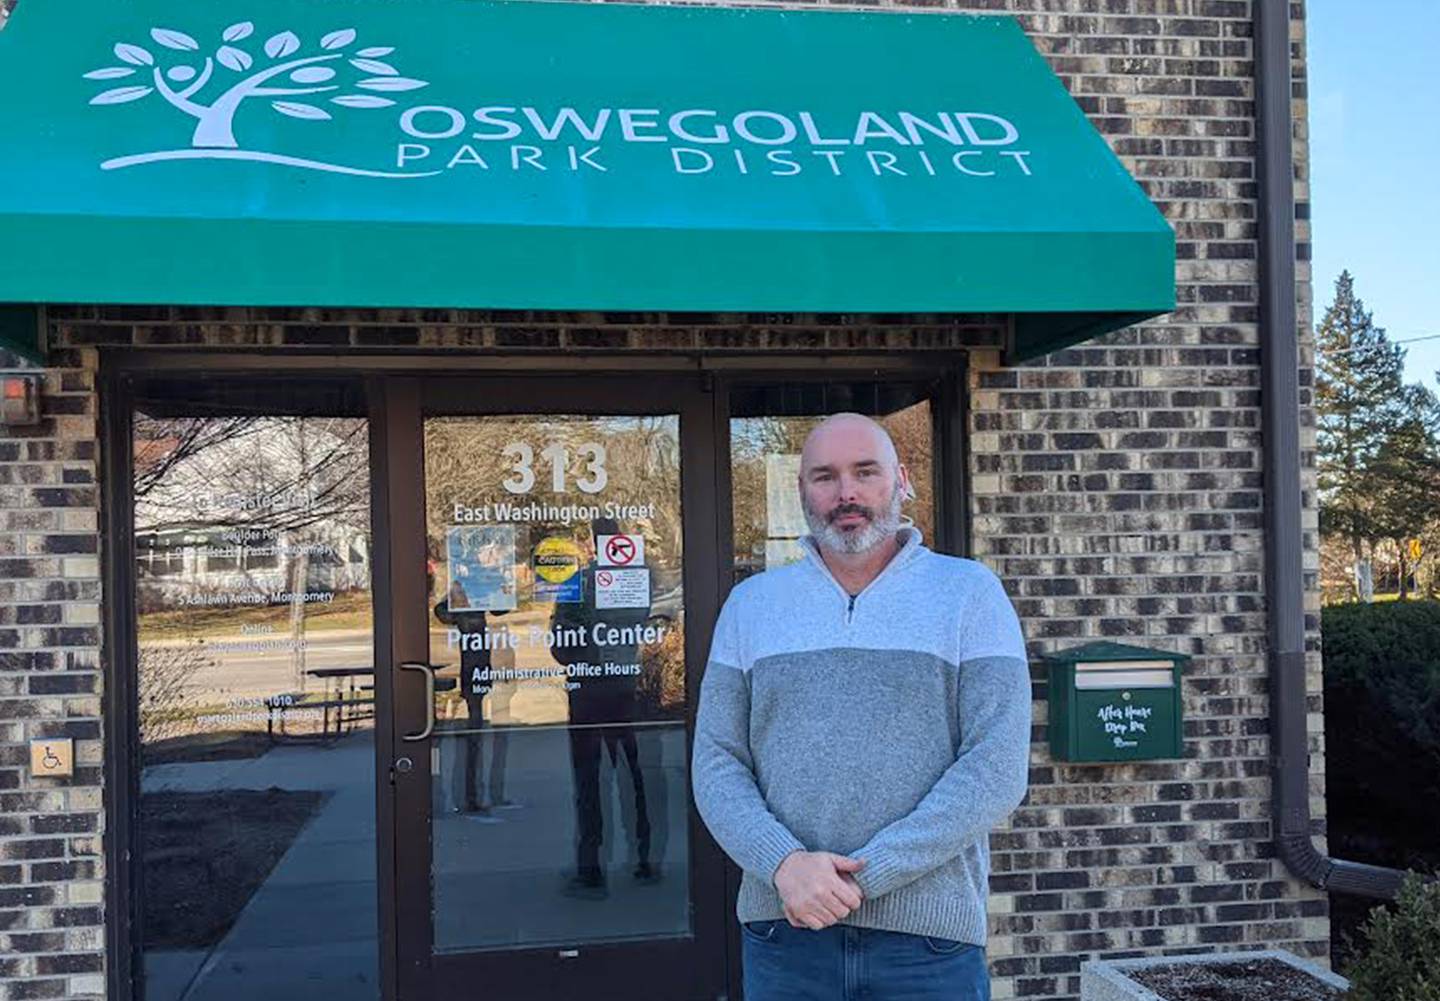 As the Oswegoland Park District’s new executive director, Tom Betsinger wants to continue to hear from the public about what the district offers and how it can improve.